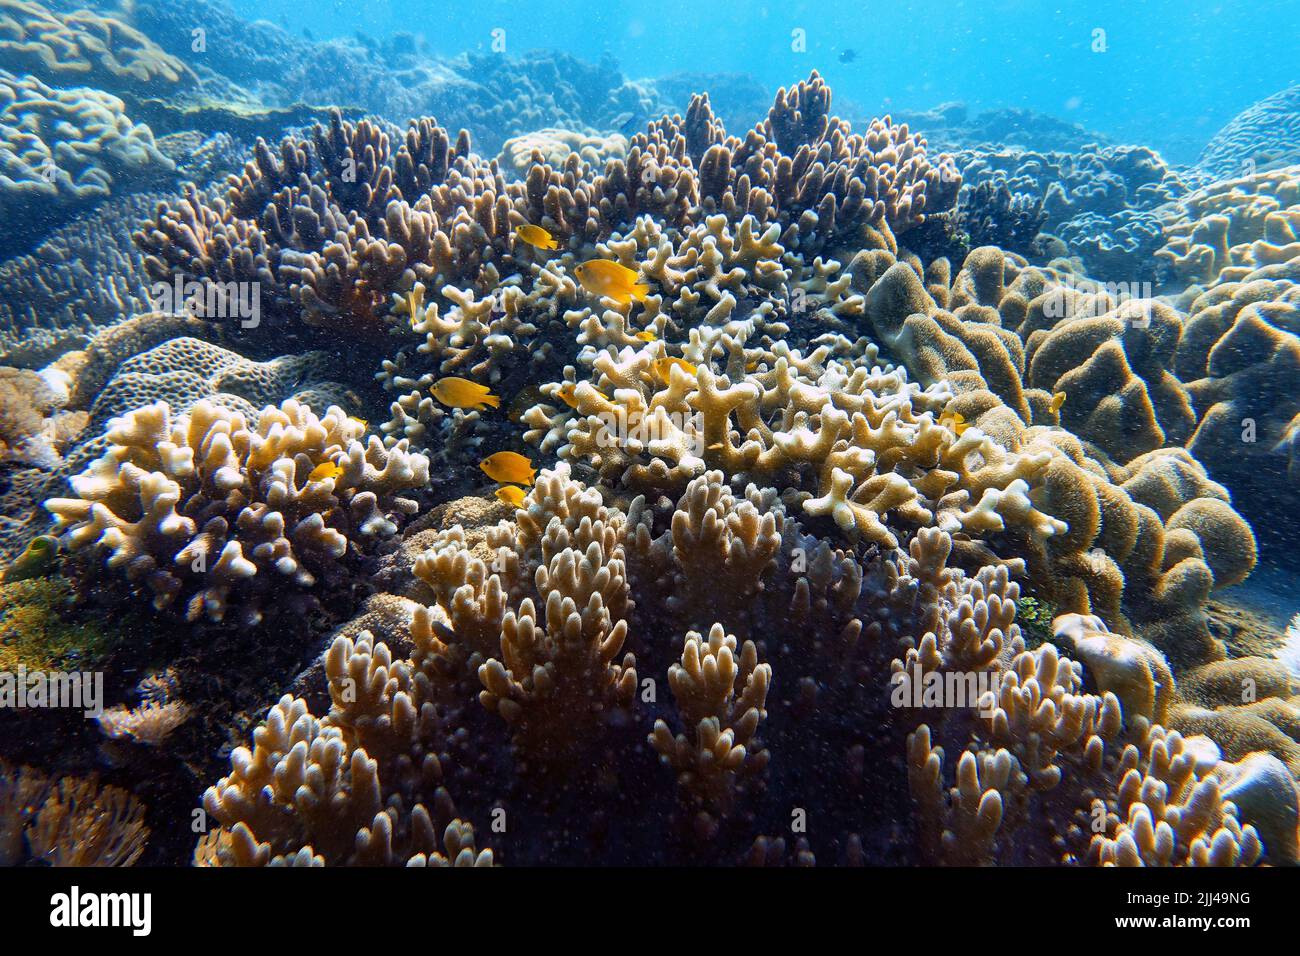 Indonesia Sumbawa - Colorful coral reef with fish Stock Photo - Alamy